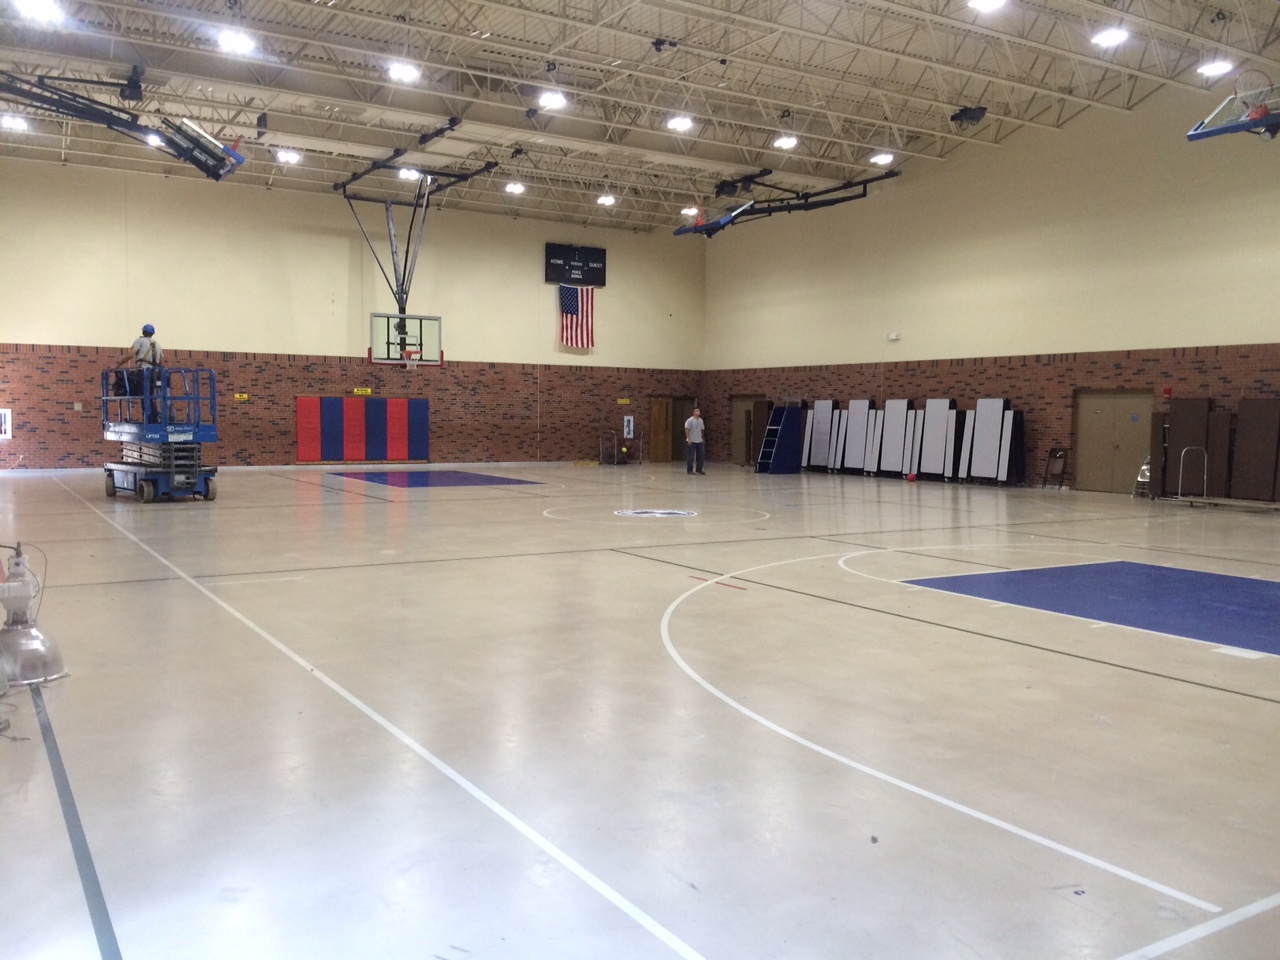 Classical School of Wichita partners with Wichita electrician for upgraded school gymnasium lighting